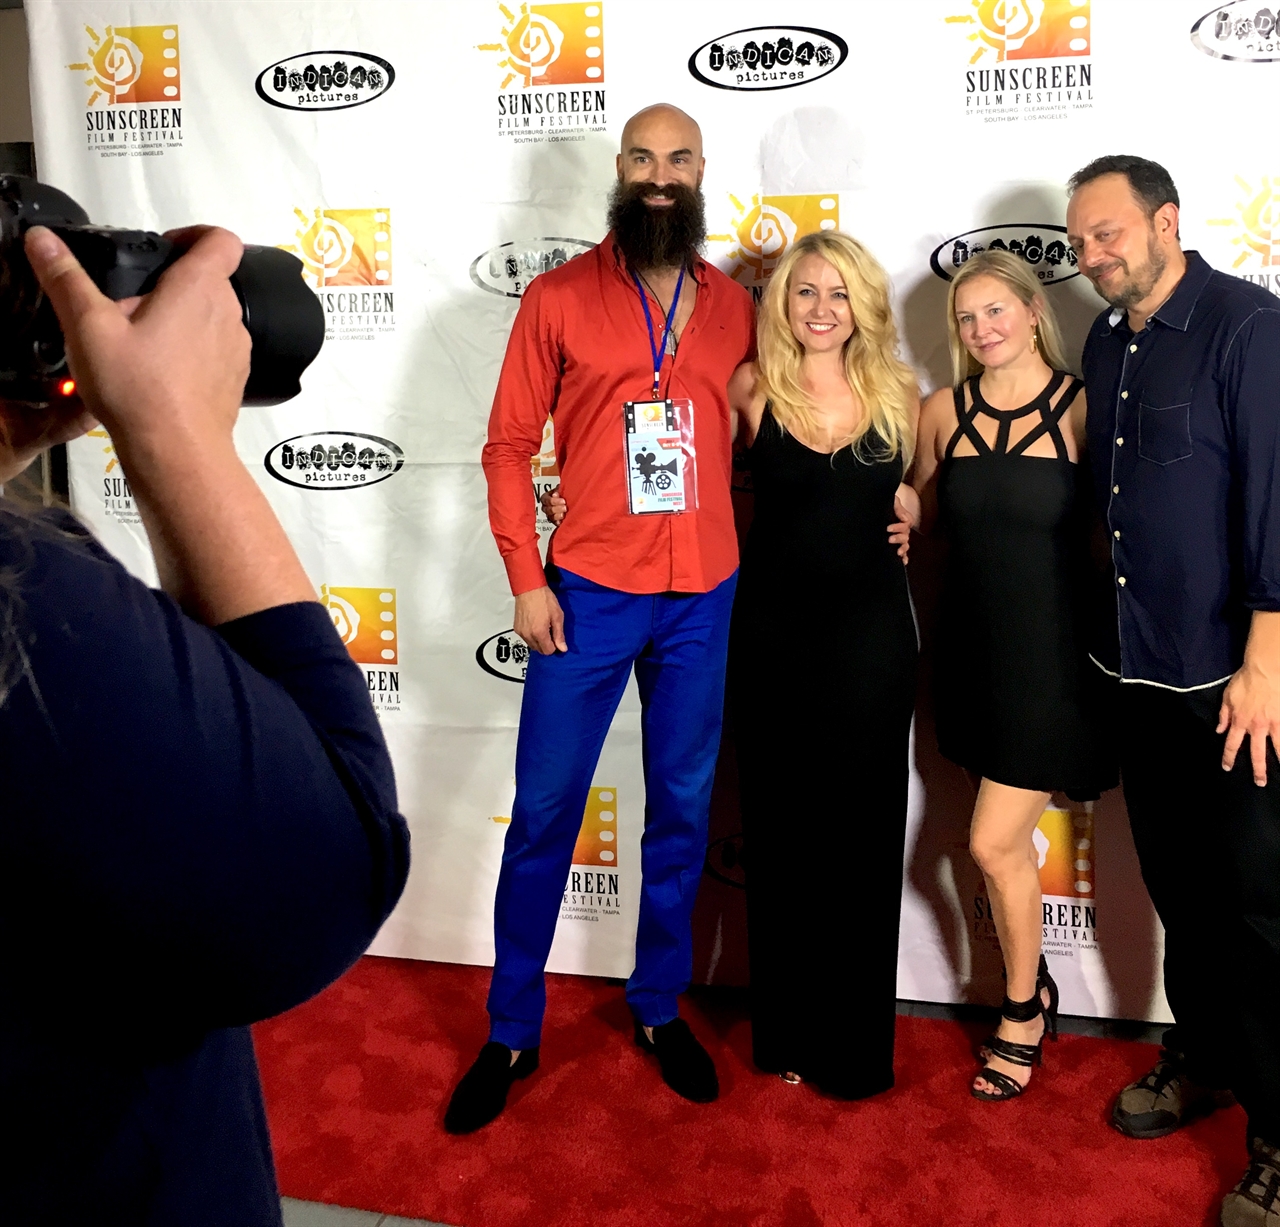 Janine with director Scott Donovan, producer and actress Rachel Ryling and actor Paul Duke at Sunscreen Film Festival